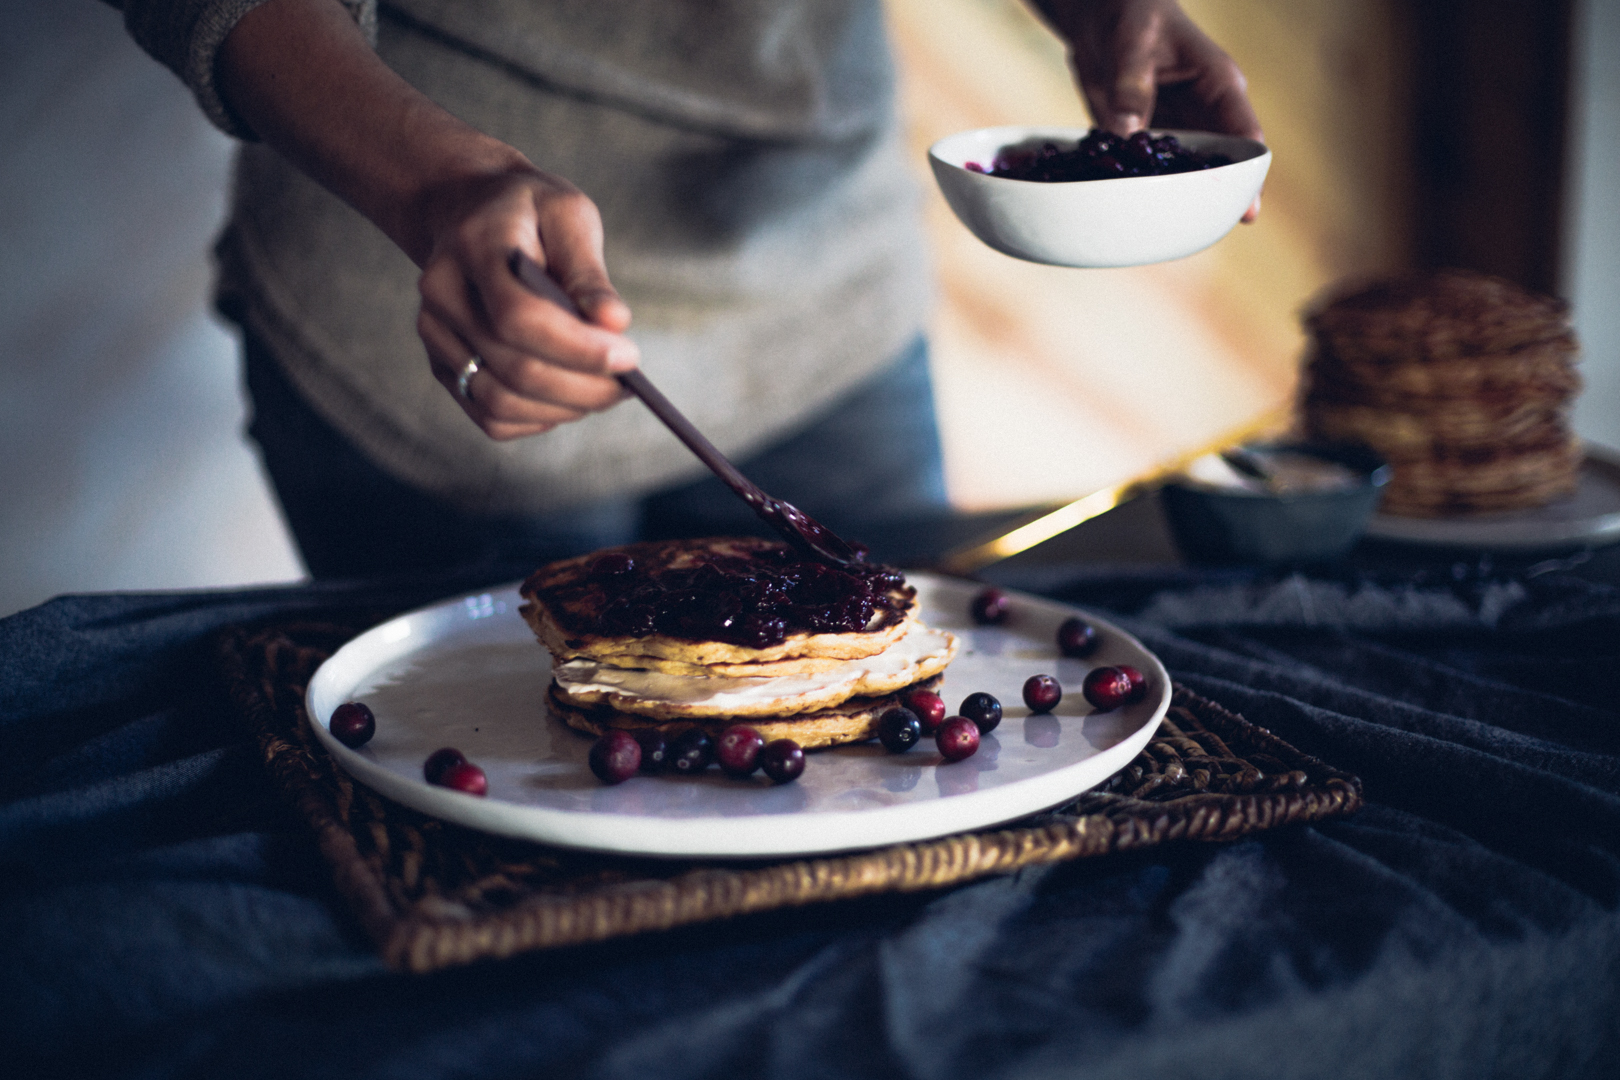 recipe-photography-styling-by-christiannkoepke-com-16